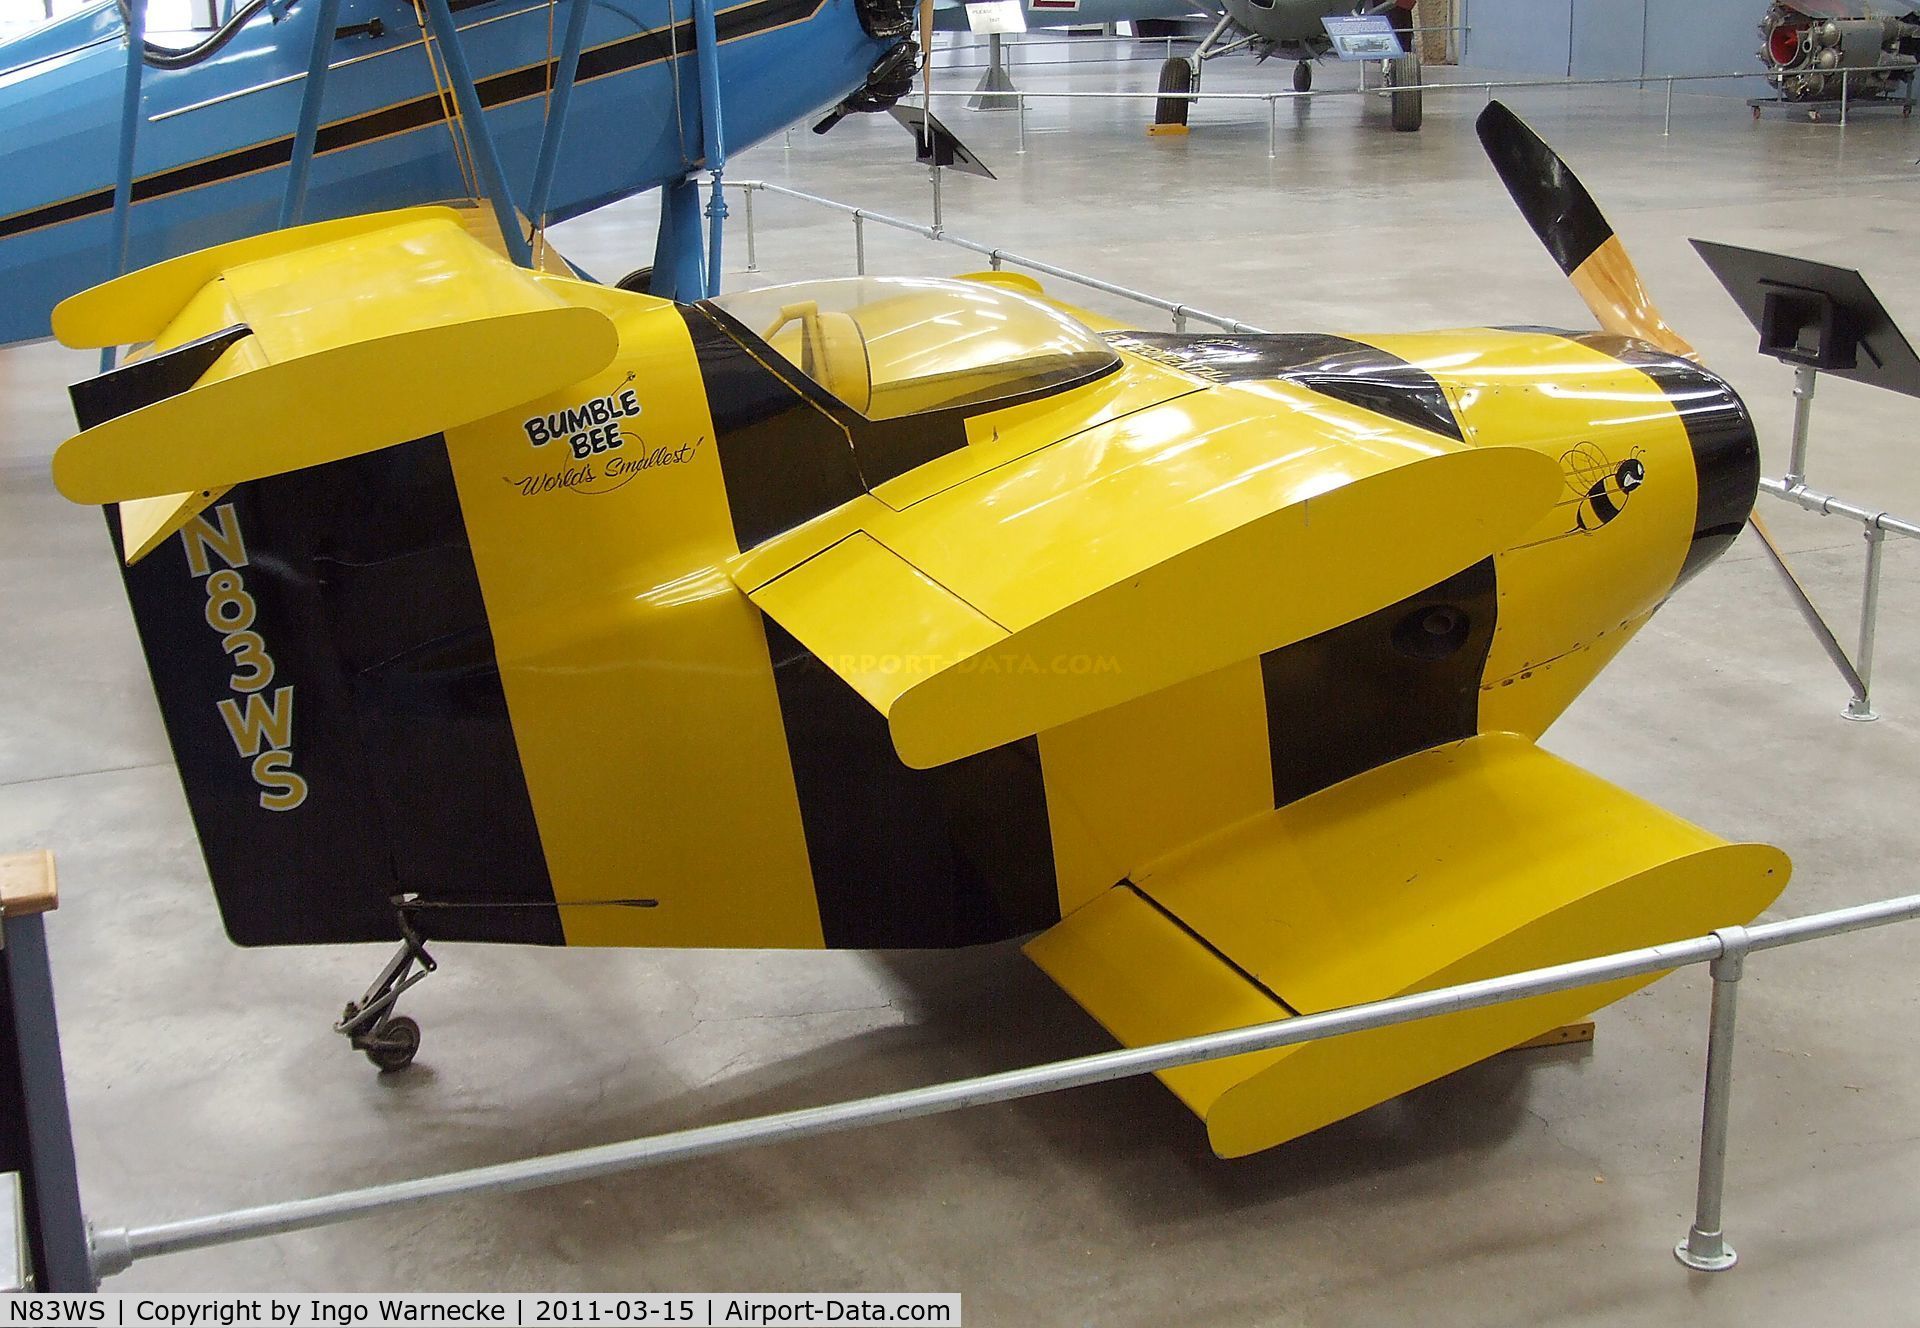 N83WS, Starr Bumble Bee C/N 1, Robert Starr Bumblebee (world's smallest aircraft) at the Pima Air & Space Museum, Tucson AZ